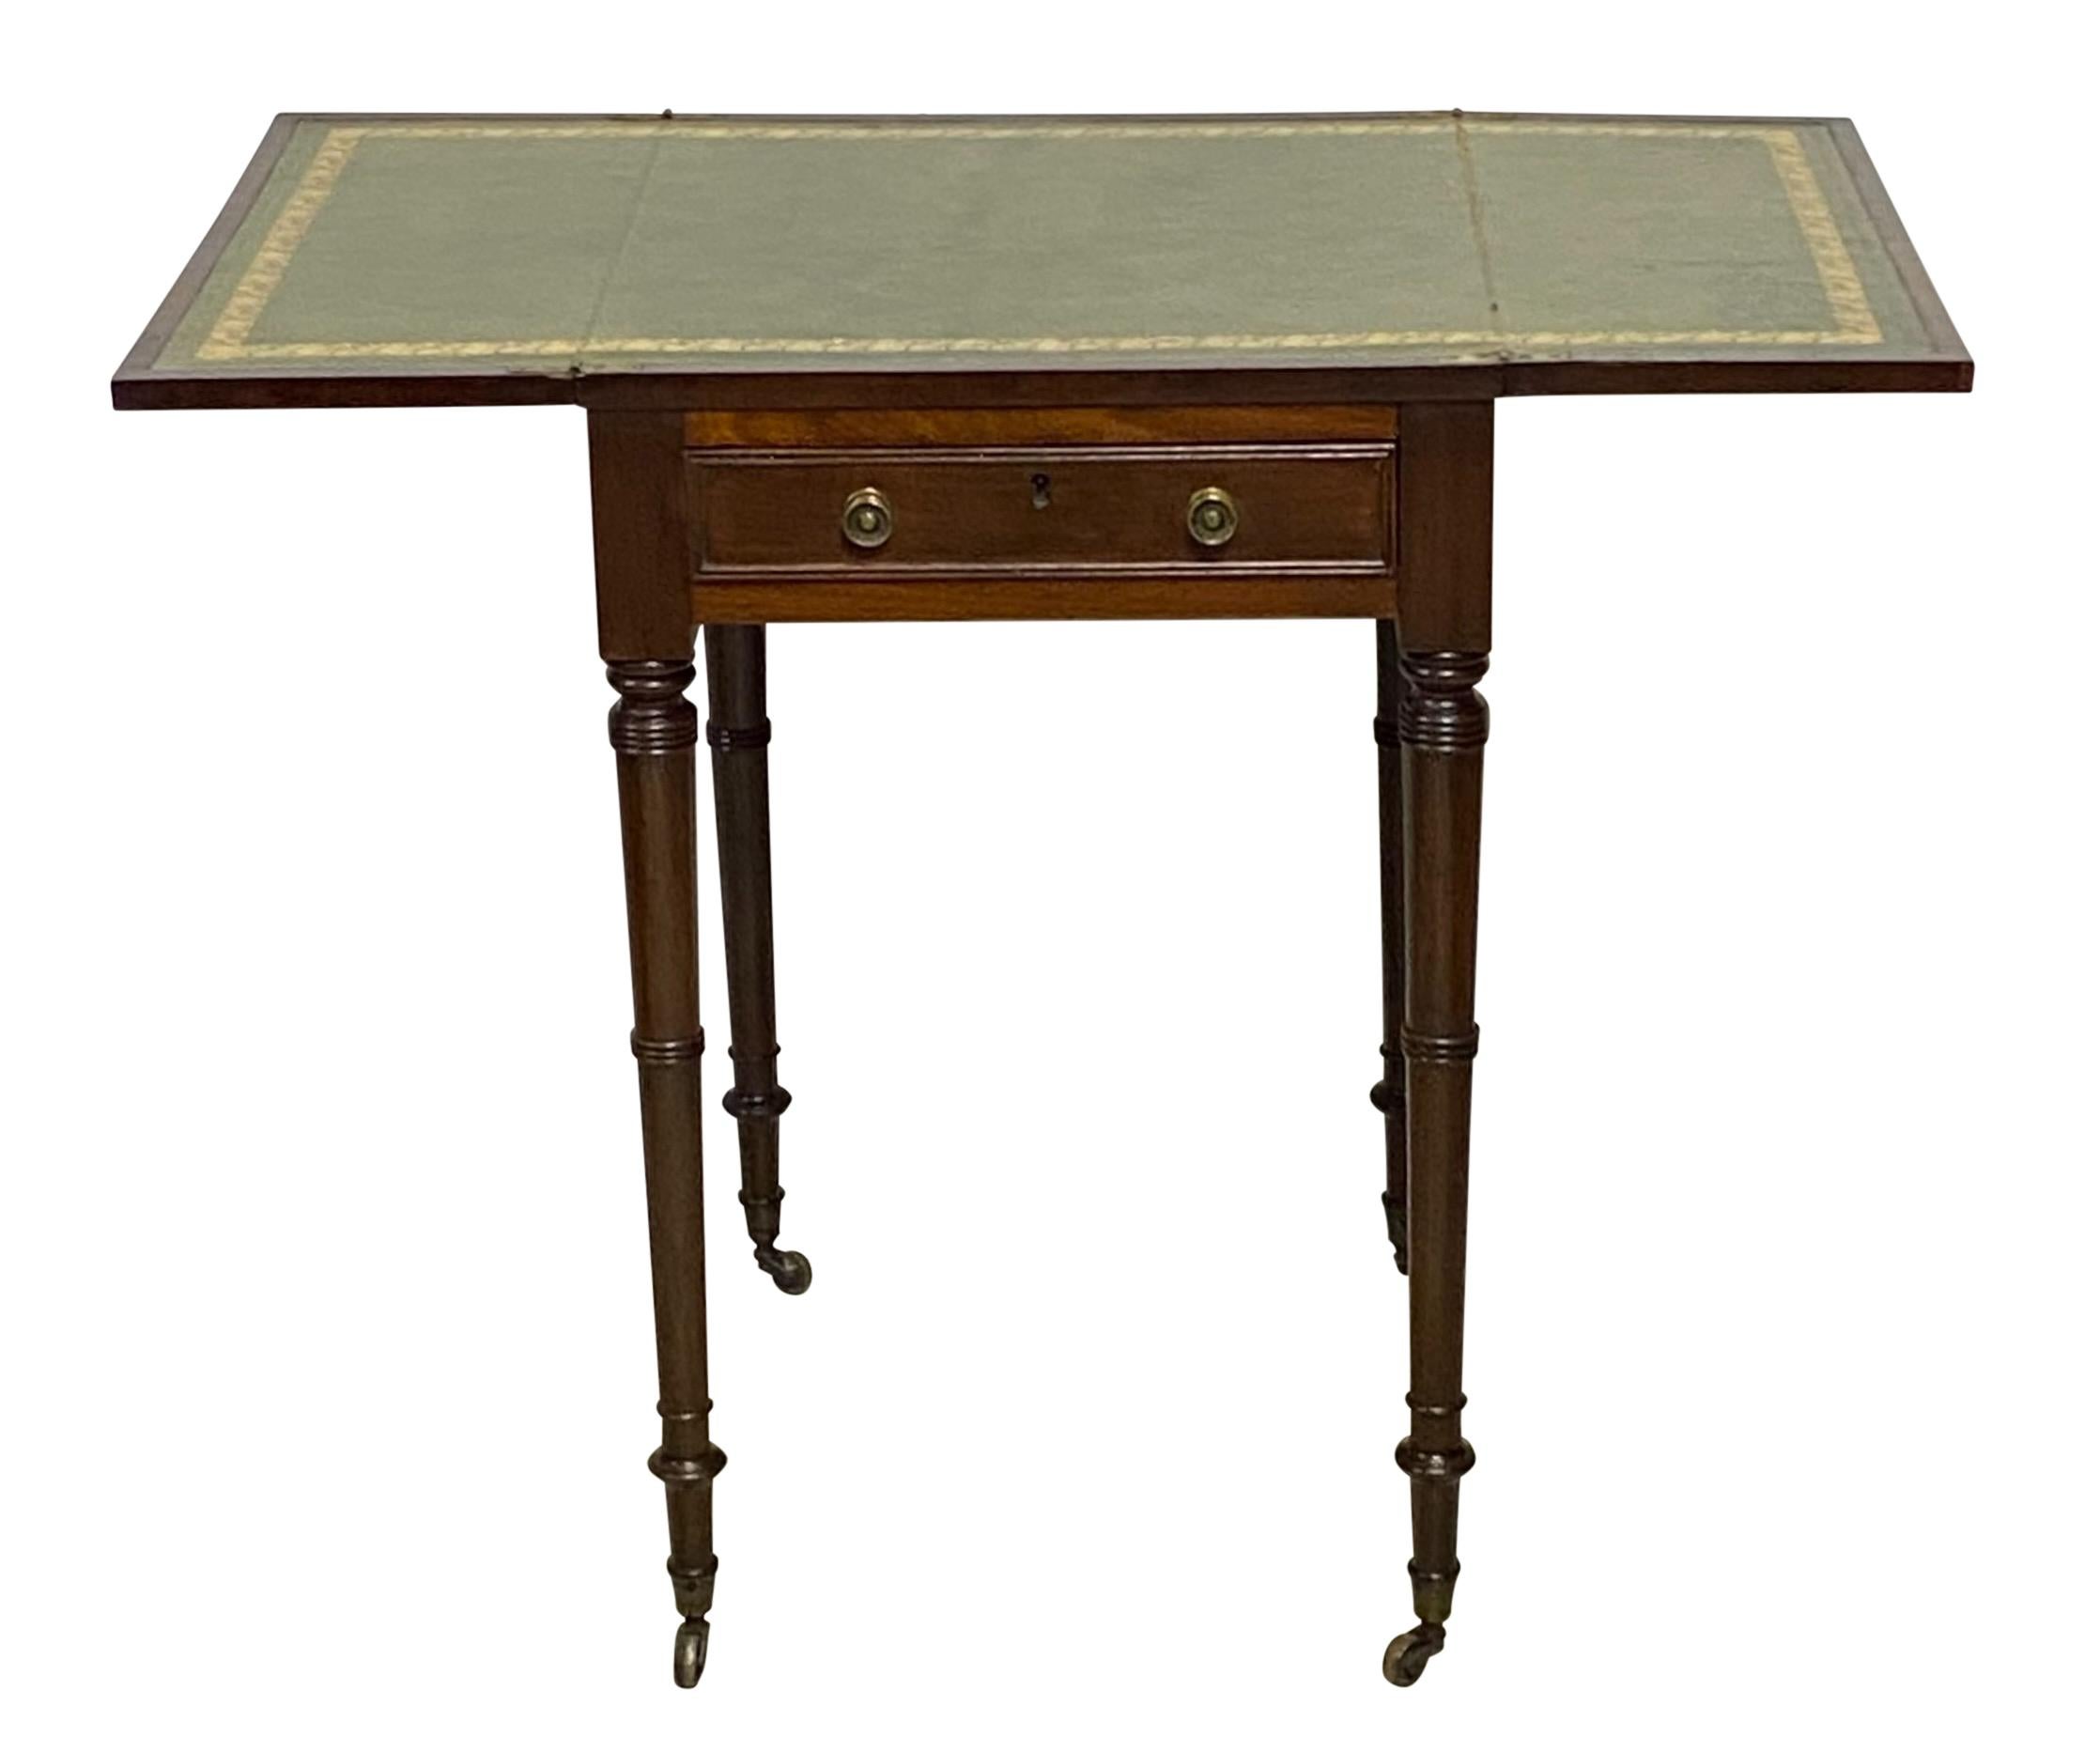 A good Regency period mahogany folding work / side table with inset tooled leather surface.
England, early 19th century.
When the table is open the width measures 35.5 inches.
 